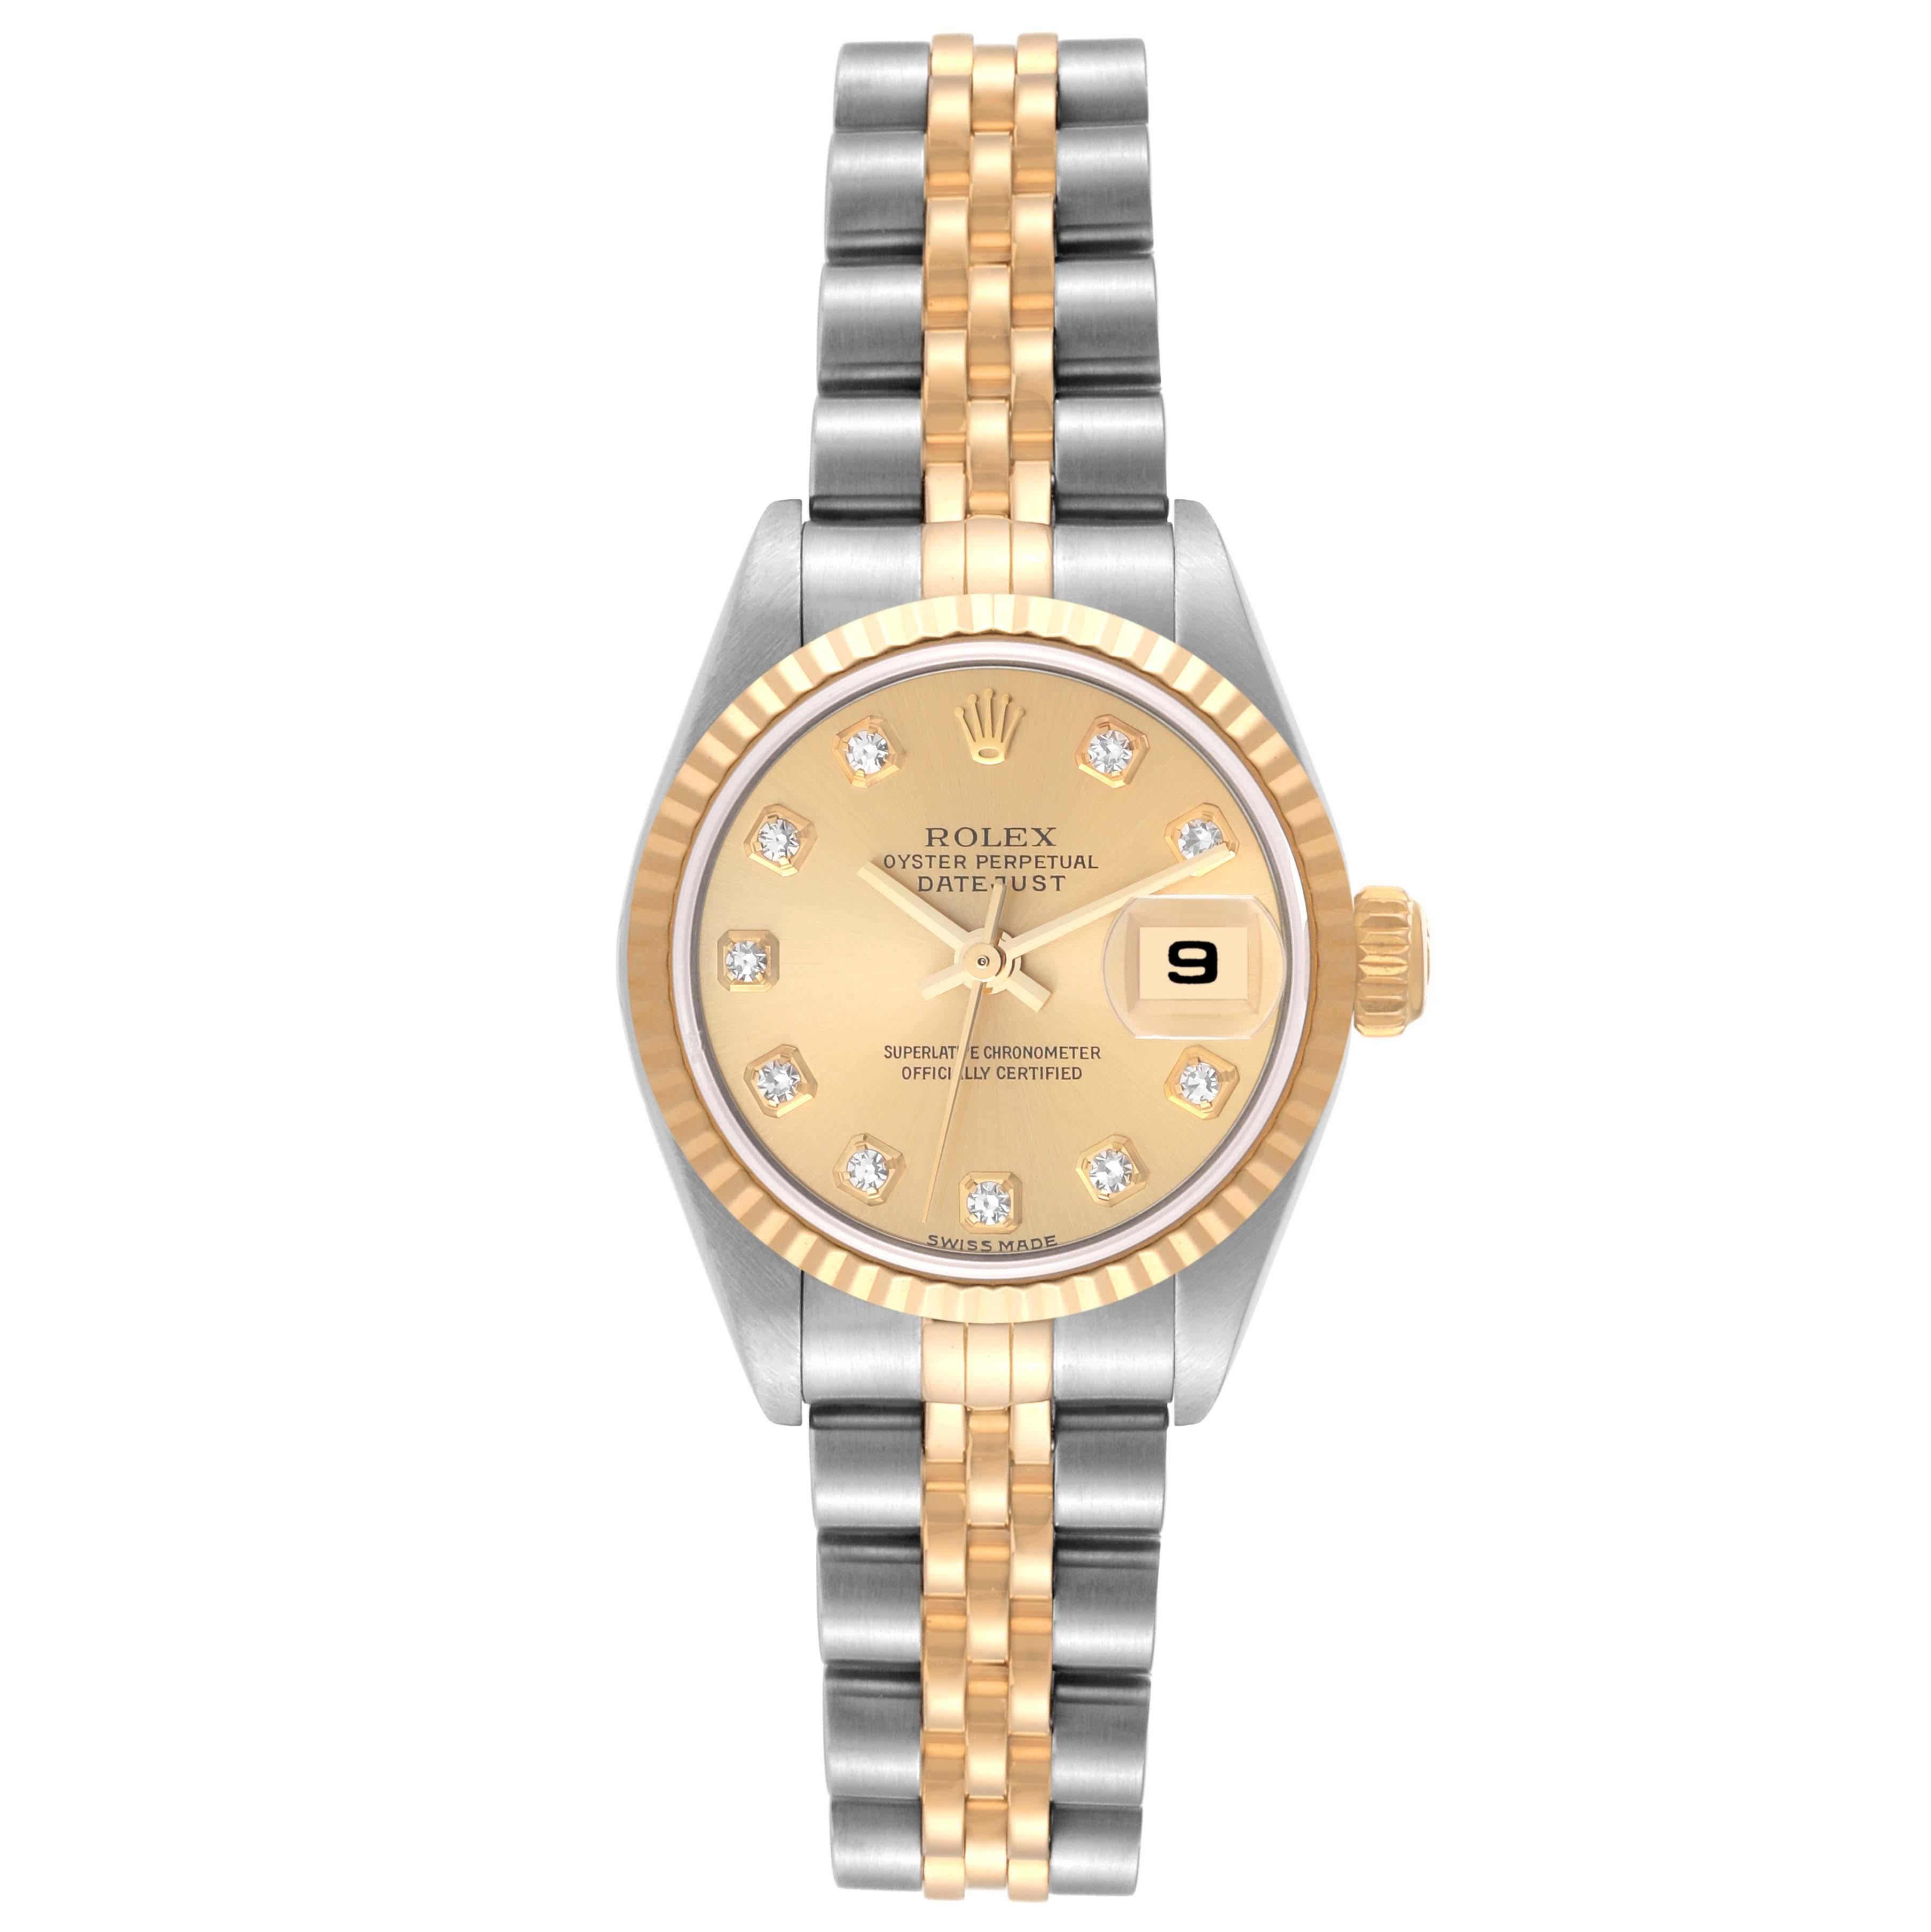 Rolex Datejust Steel Yellow Gold Champagne Diamond Dial Ladies Watch 79173 For Sale 1